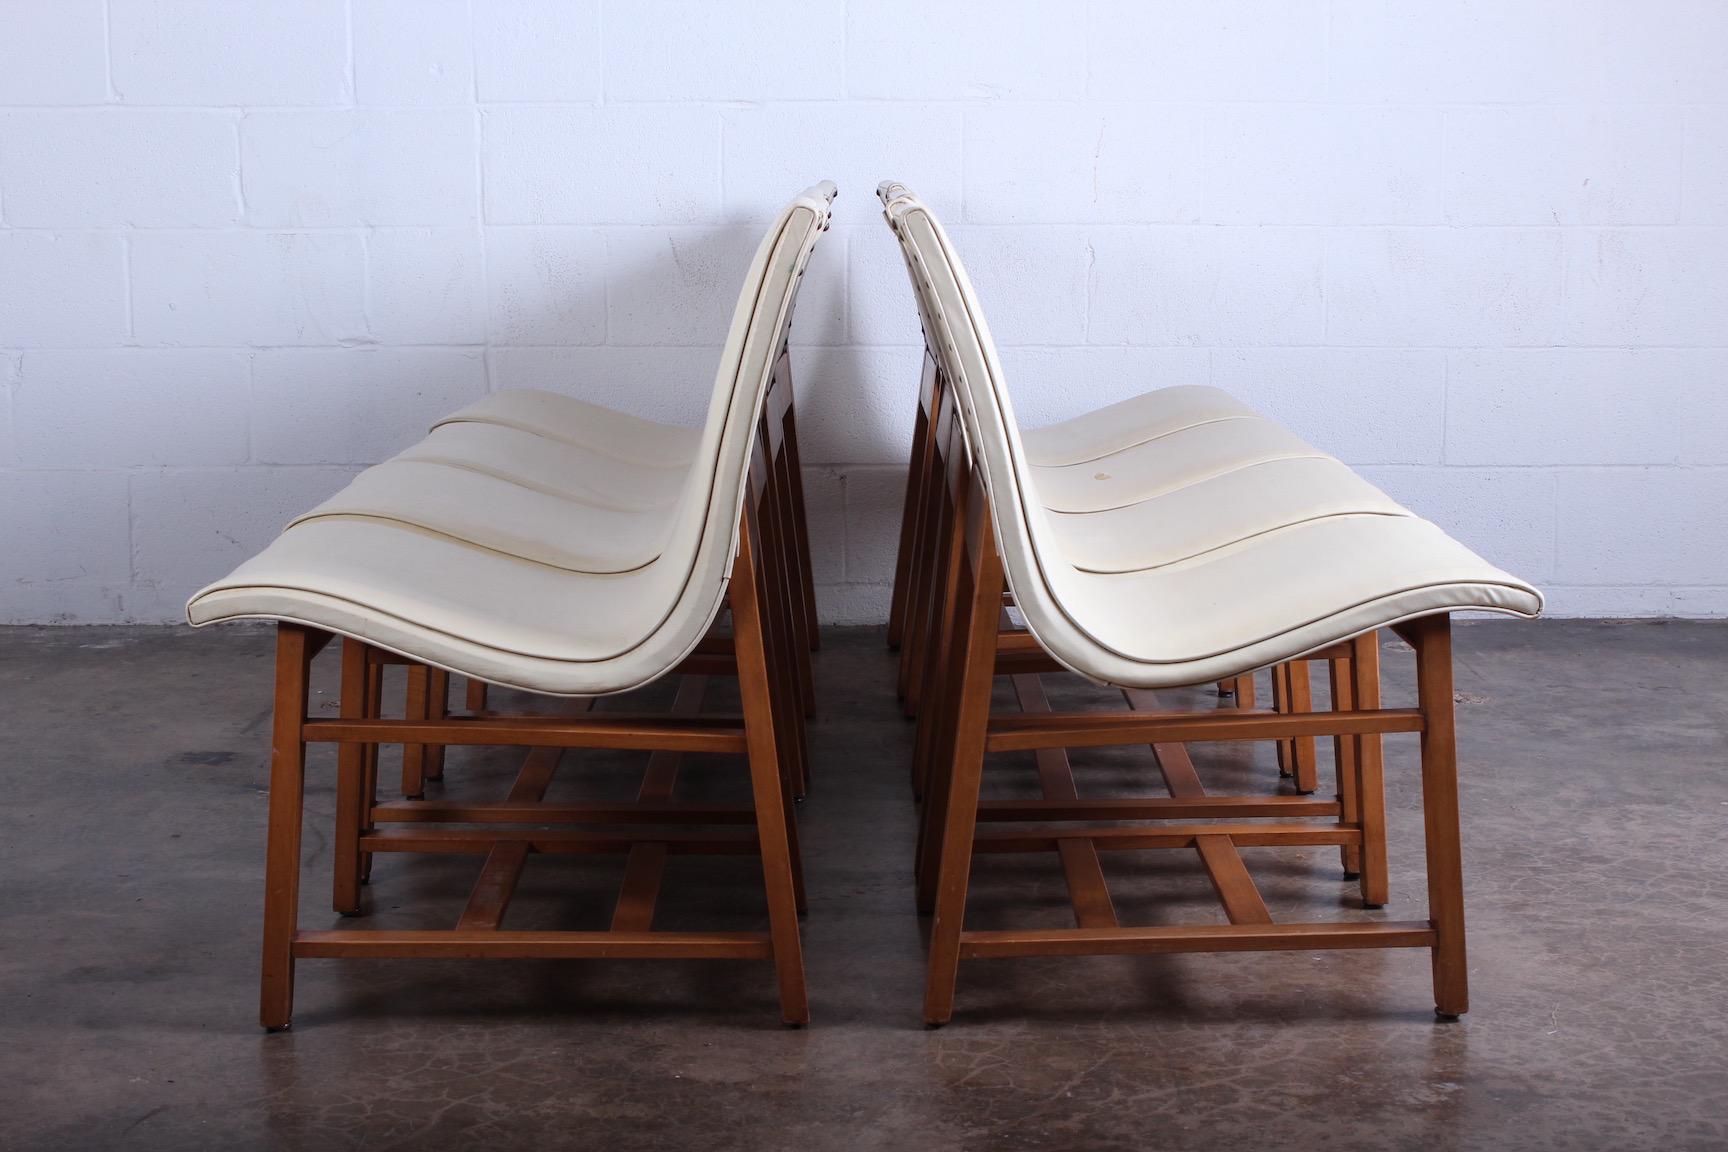 A rare set of eight chairs by Charles Eames and Eero Saarinen for the Kleinhans Music Hall, Buffalo, 1939. 

The Kleinhans music hall chair is an early collaboration by Charles Eames and Eero Saarinen involving molded plywood. Developed at the